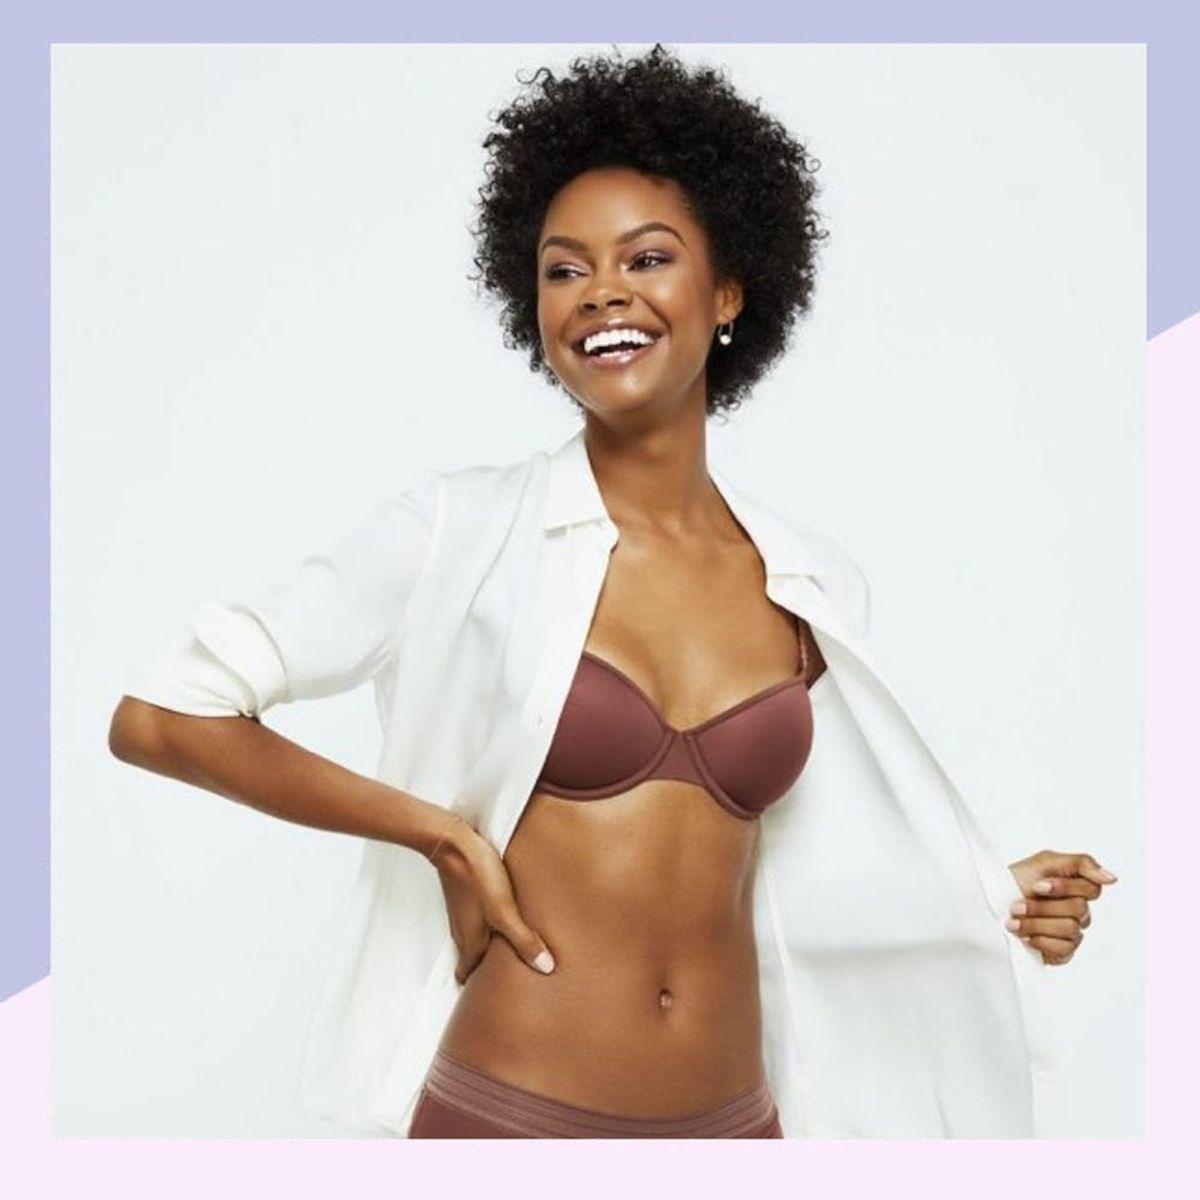 7 Common Bra (and Shapewear) Myths — Debunked﻿﻿